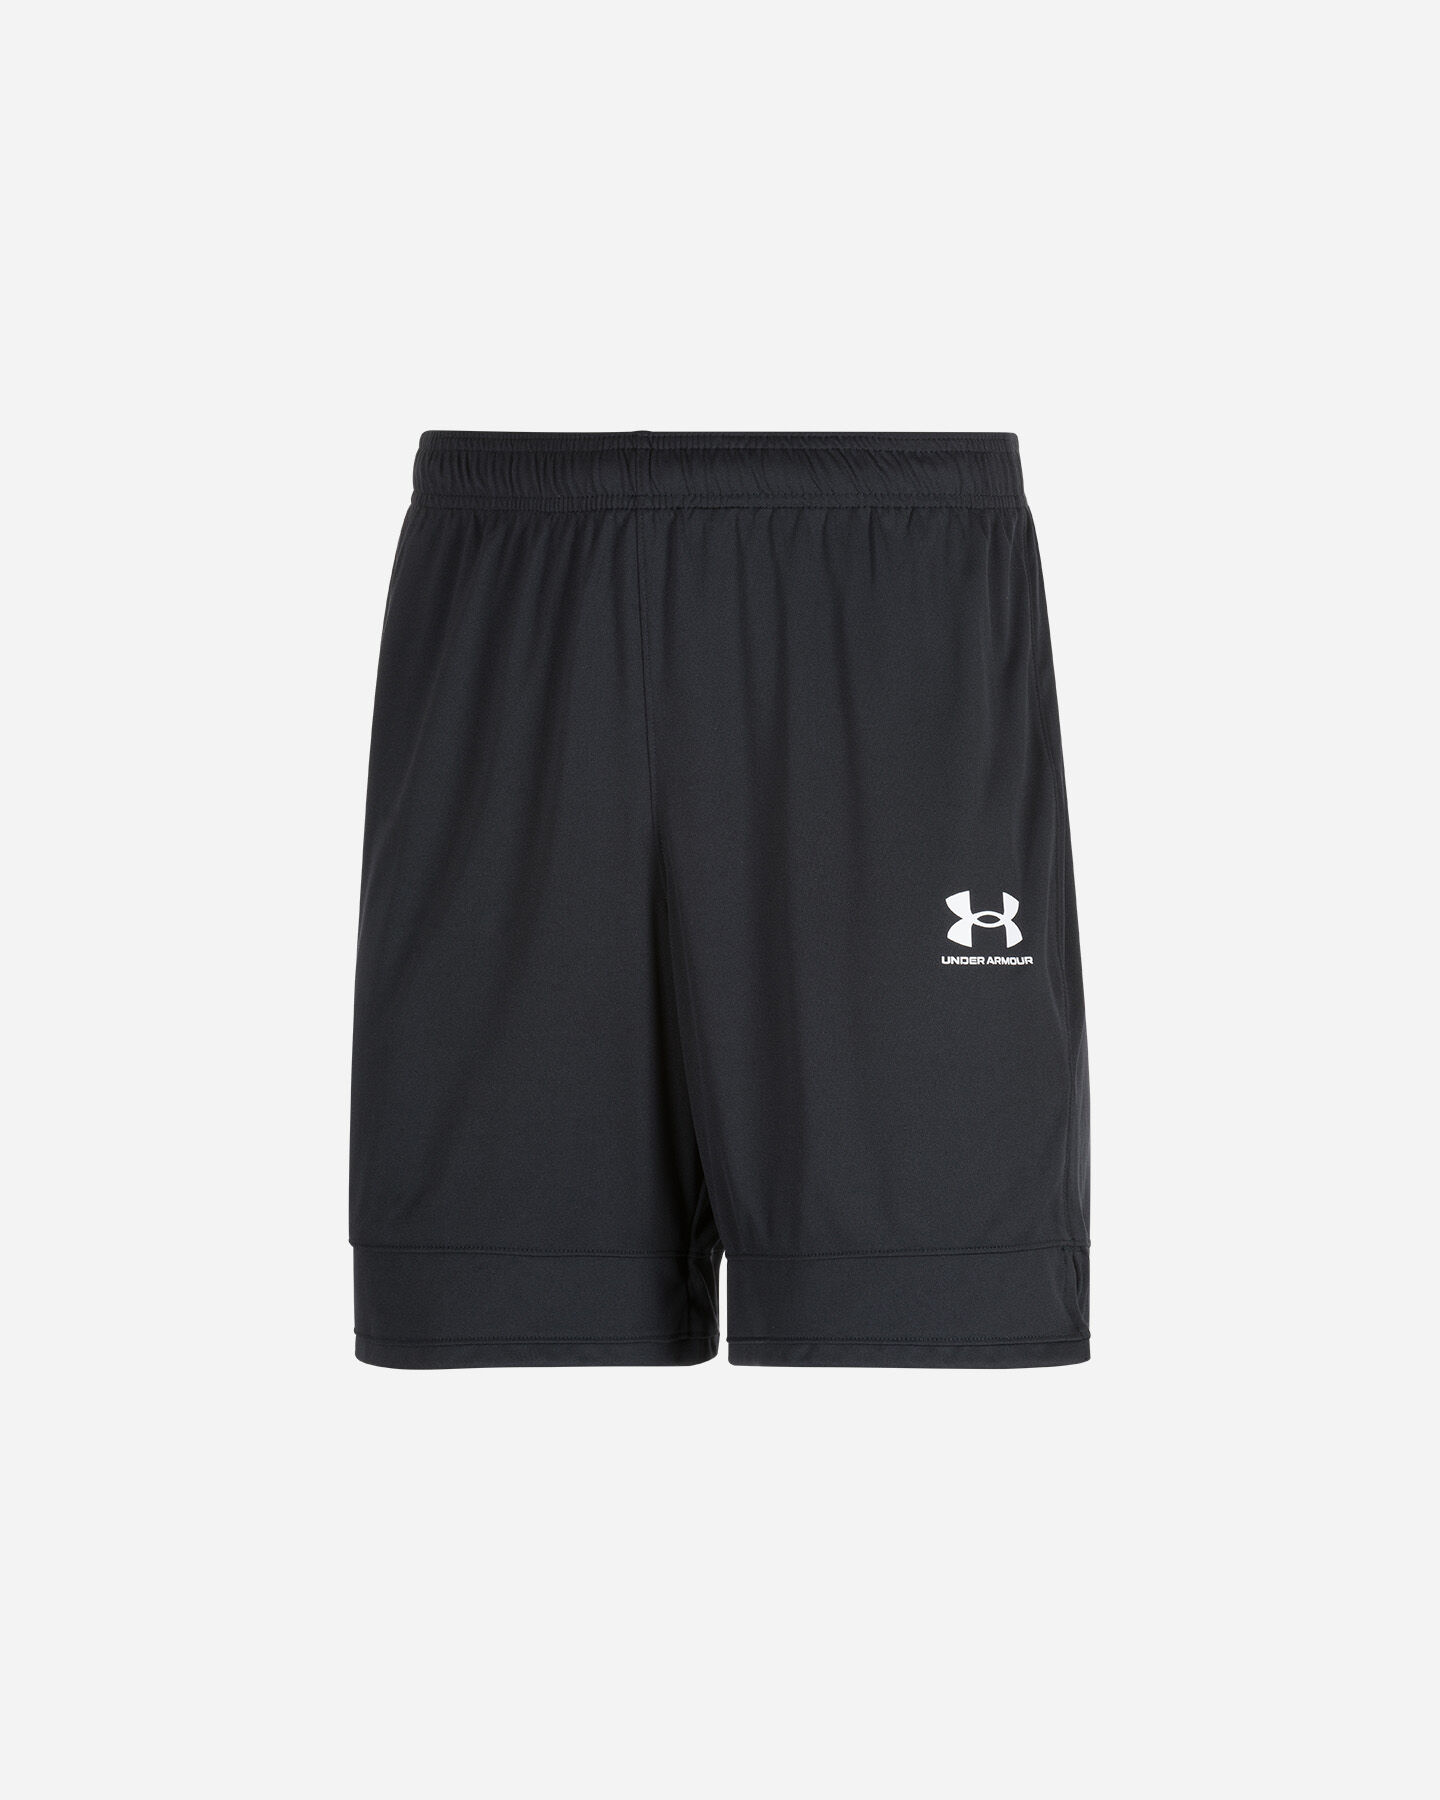  Pantalone training UNDER ARMOUR CHALLENGER KNIT M S5168553|0001|SM scatto 0